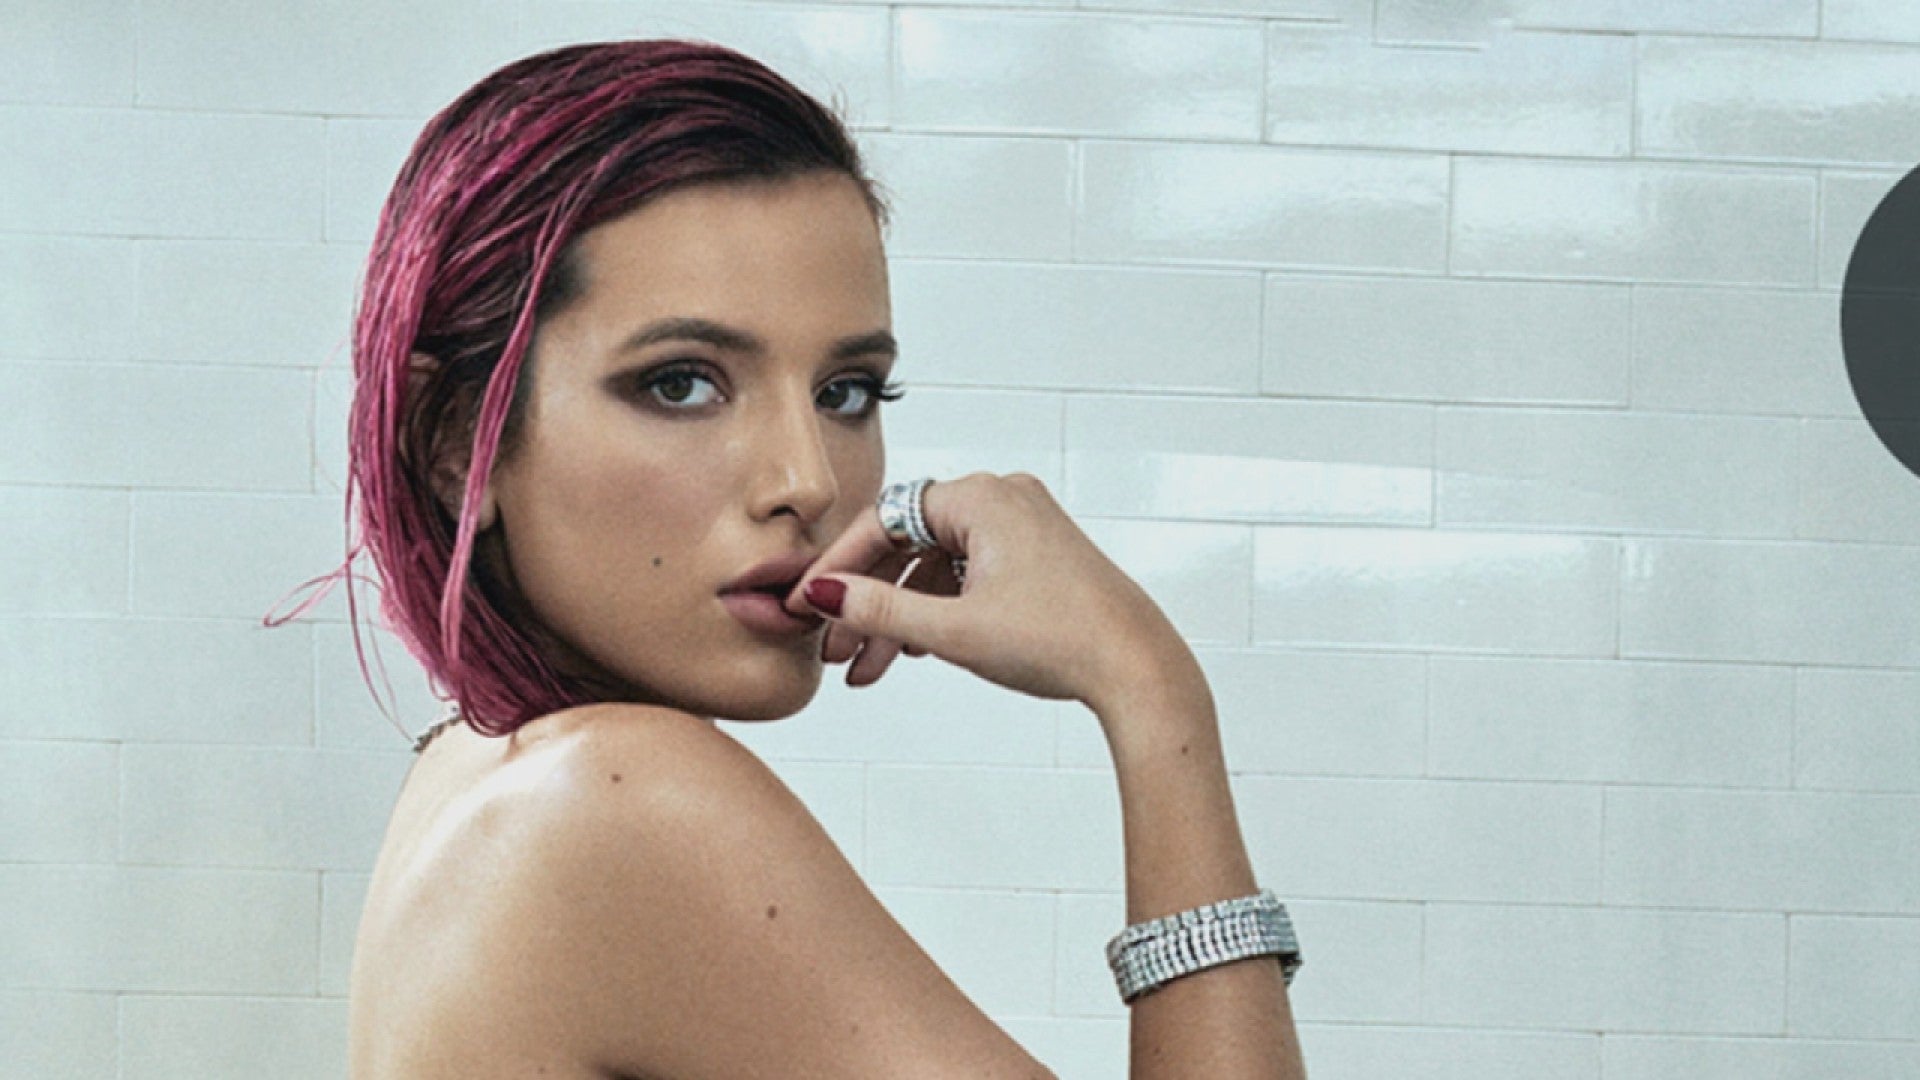 Bella Thorne Naked Having Sex - Bella Thorne Goes Nude for Latest Photo Shoot -- See the Sexy Shots!